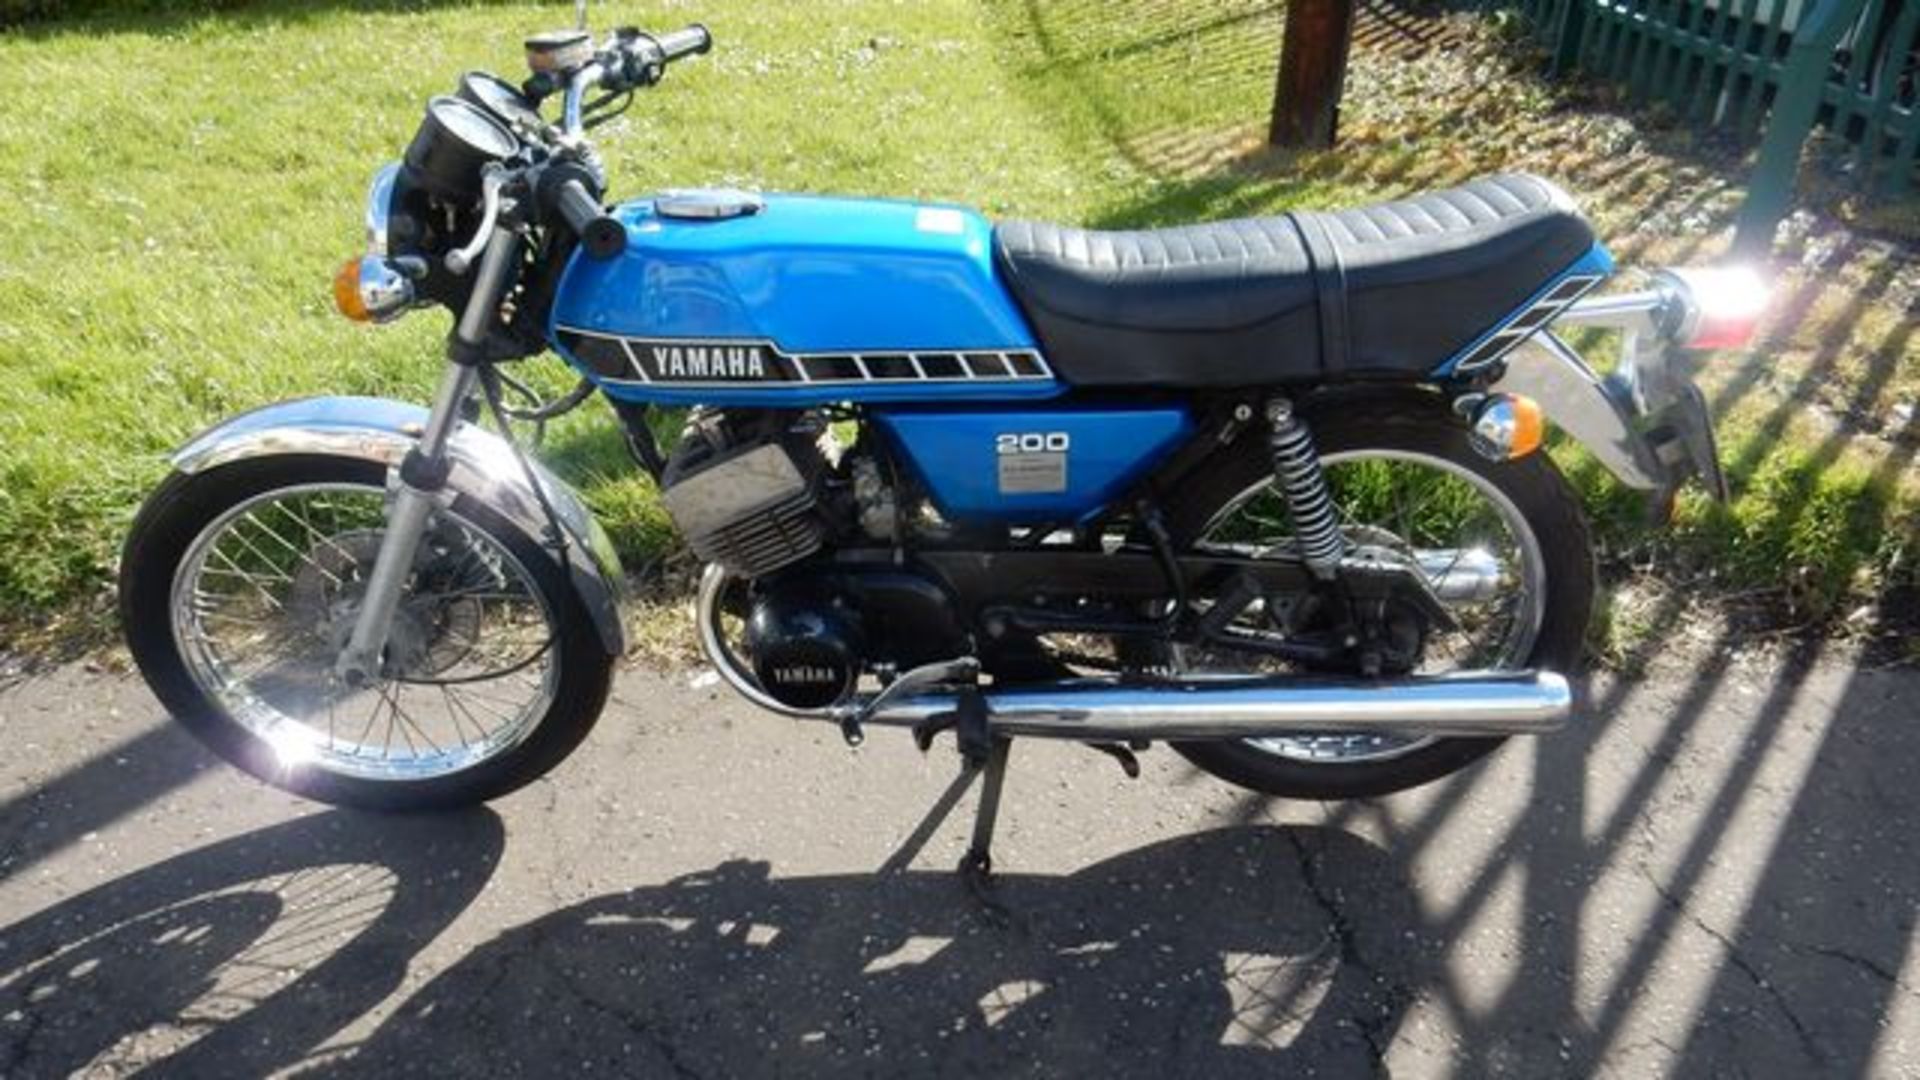 YAMAHA, RD200 - 195cc, Frame number 0200457 - now a very rare example of these two stroke machines - Image 2 of 18